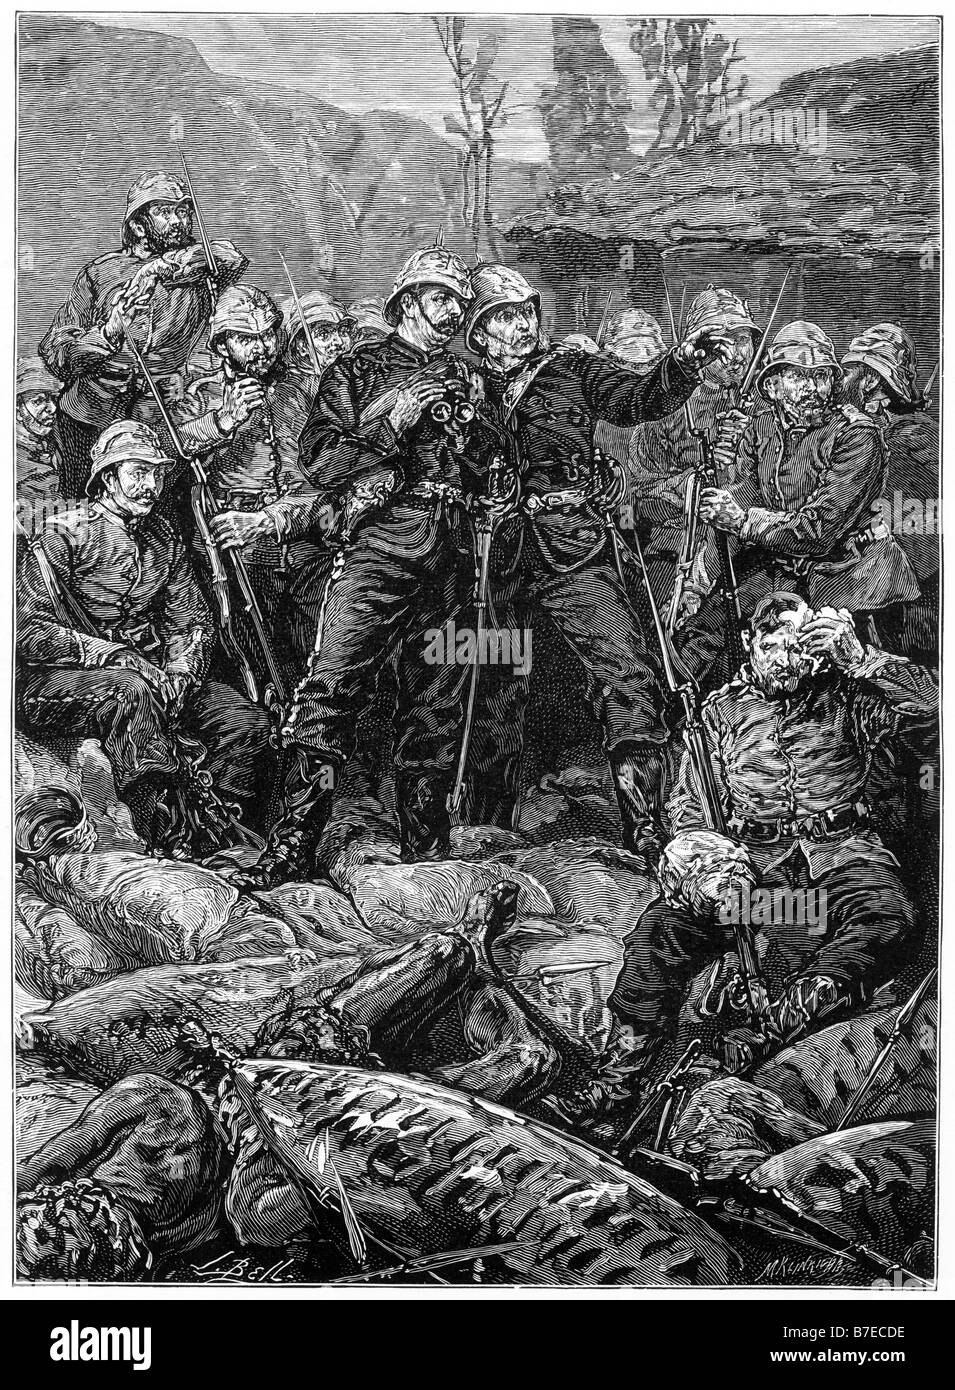 The Morning After the Defence of Rorkes Drift Zululand January 1879 19th Century Illustration Stock Photo